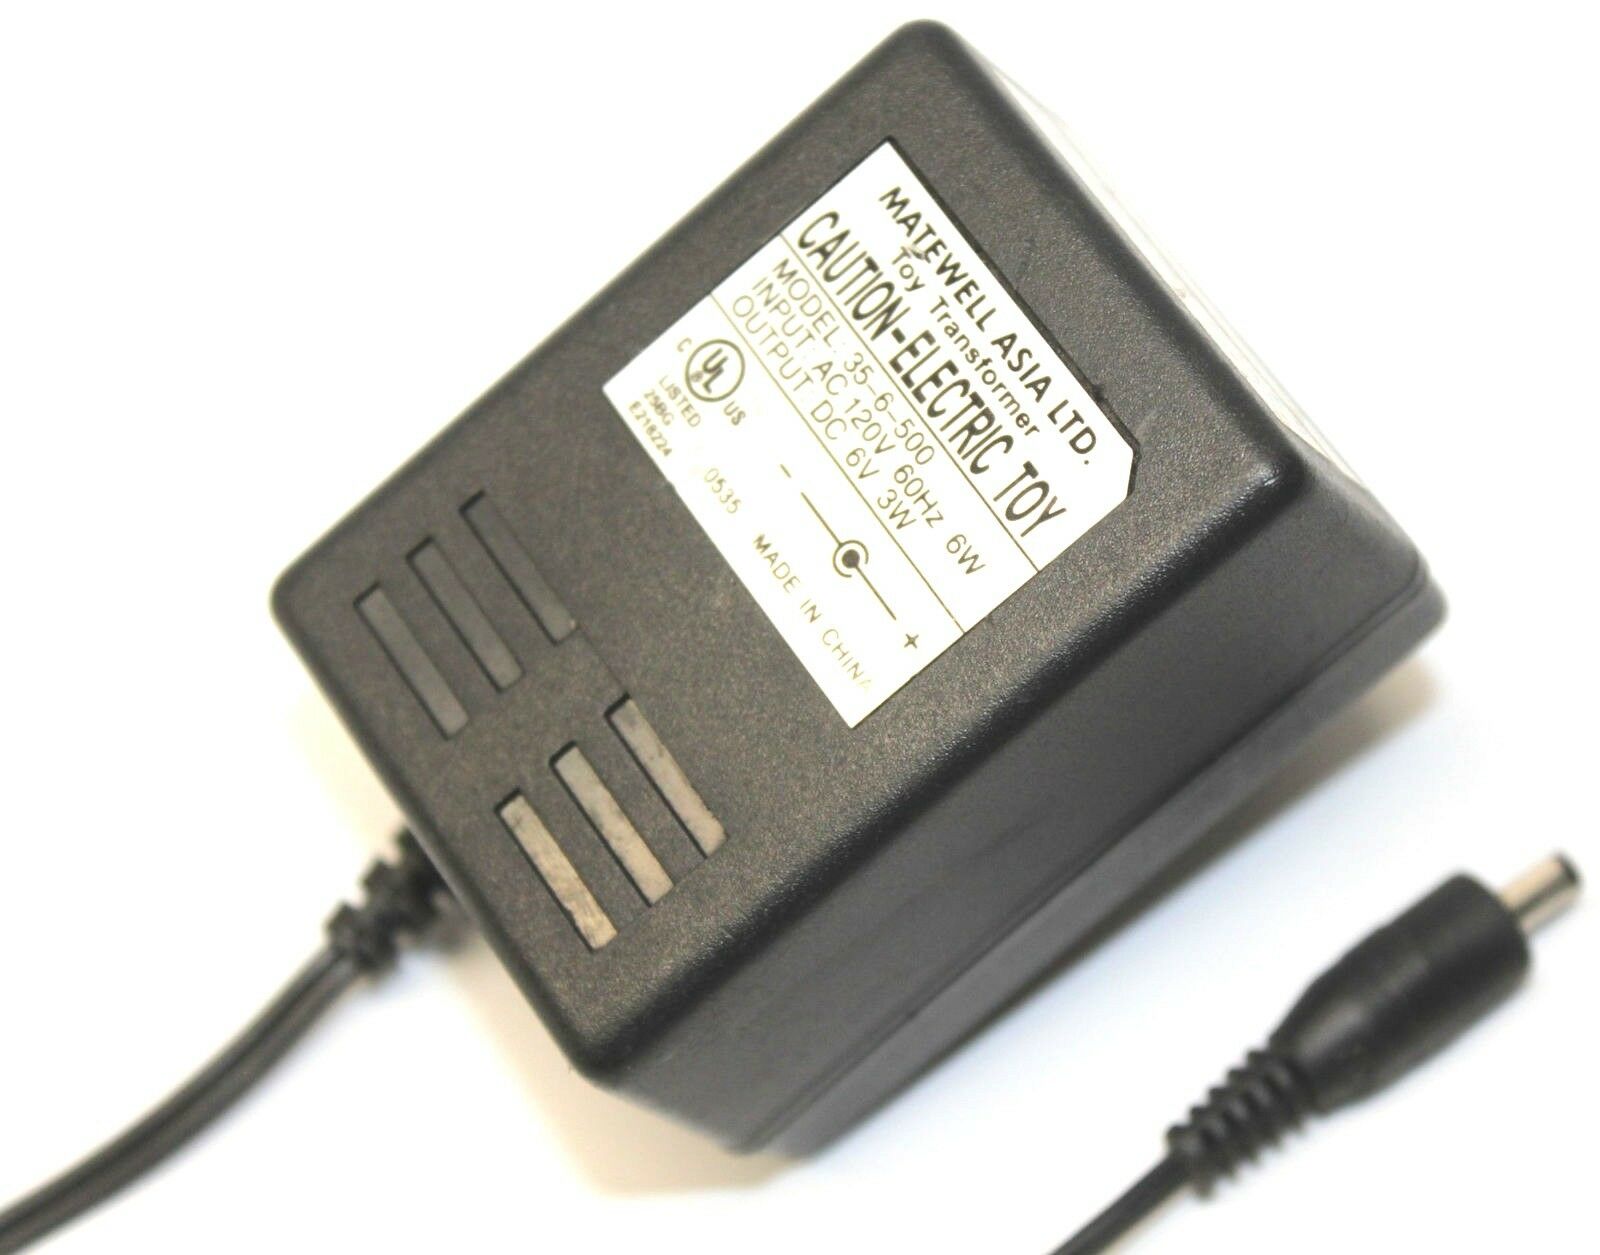 Matewell 35-6-500 Toy Transformer AC Adapter 6 Volts 3 Watts Power Supply Cable MPN: Does Not Apply Model: 35-6-500